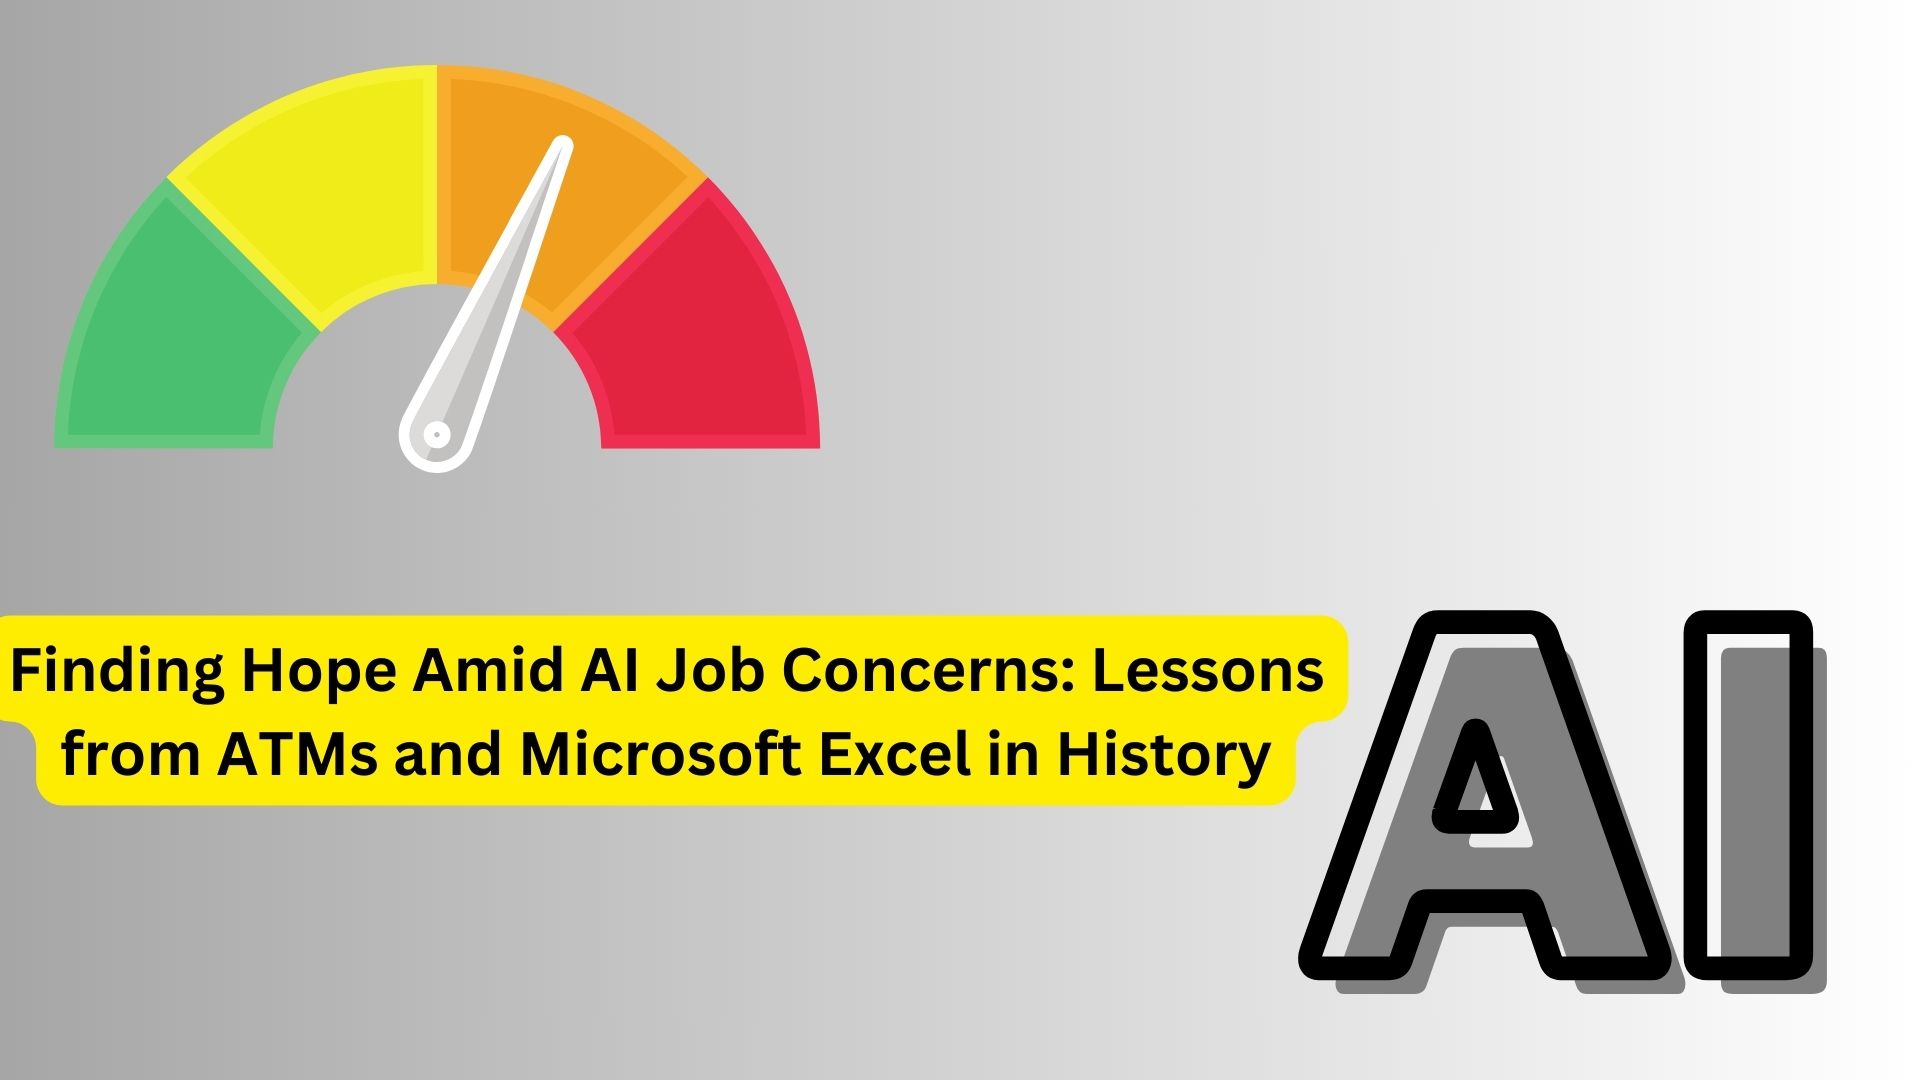 Finding Hope Amid AI Job Concerns: Lessons from ATMs and Microsoft Excel in History